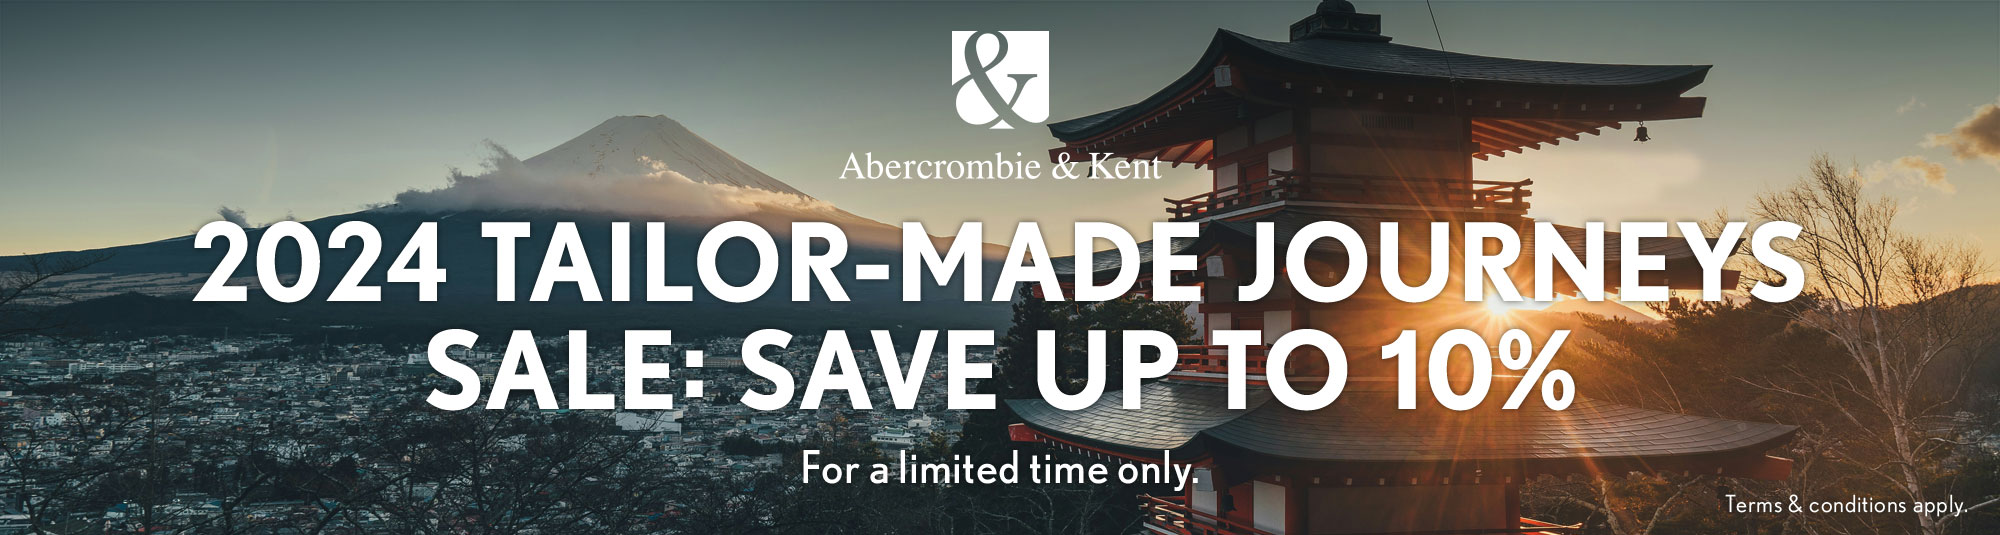 2024 Tailor-Made Journerys Sale: Save up to 10%. For a limited time only.